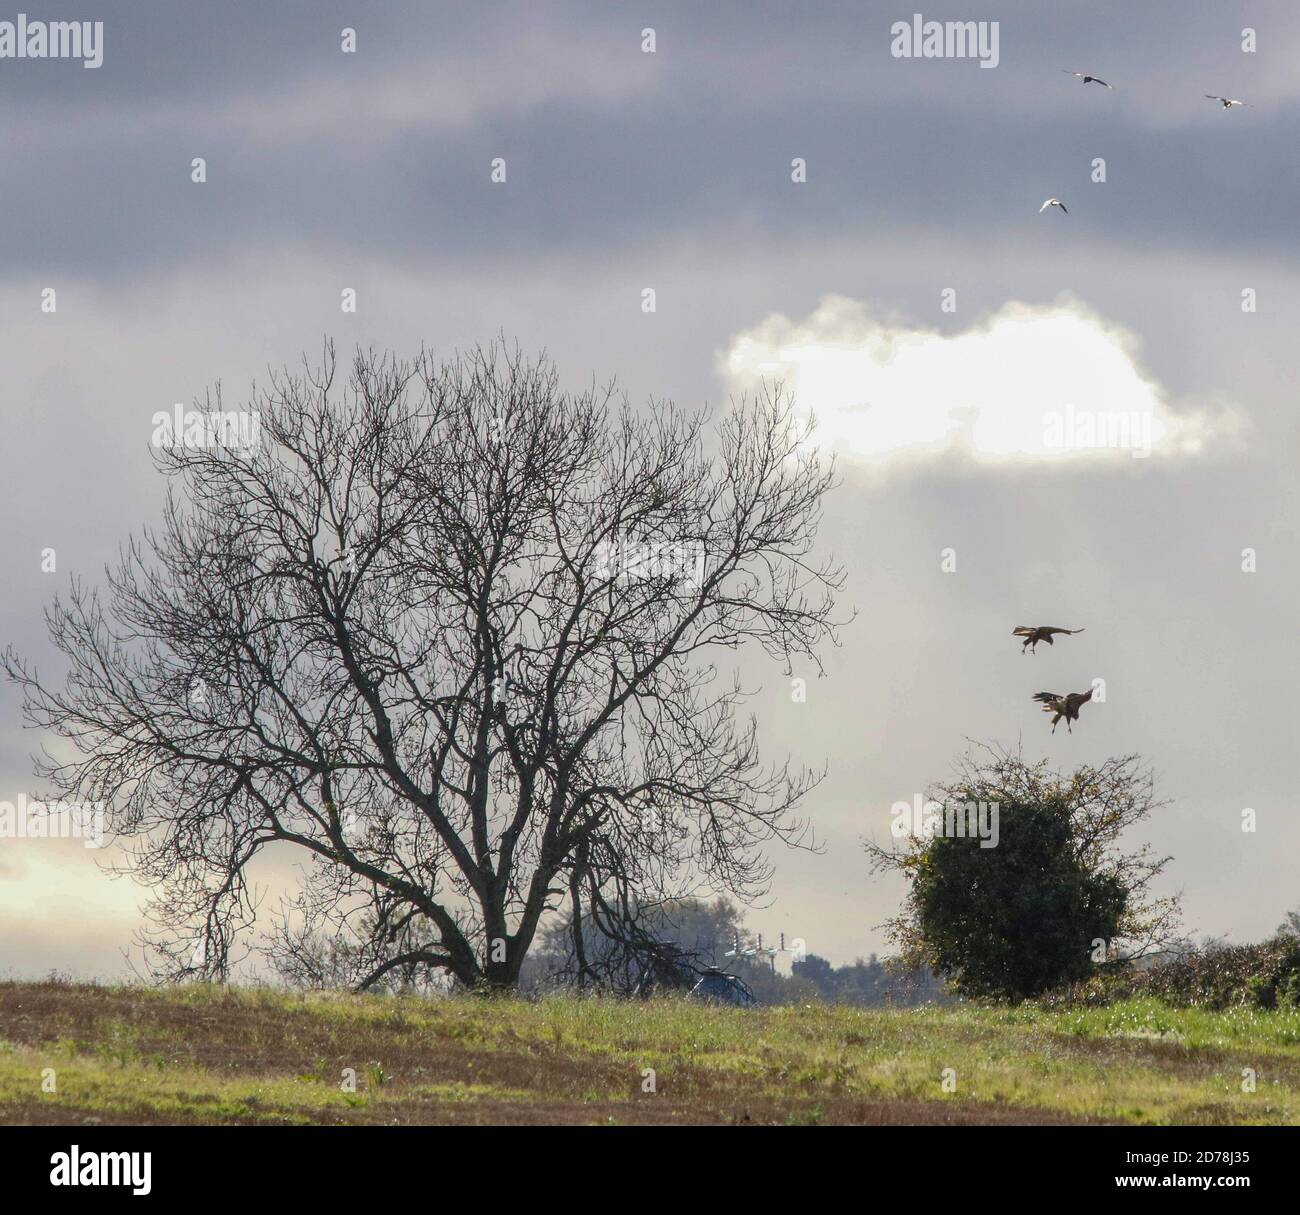 Magheralin, County Armagh, Northern Ireland. 21 Oct 2020. UK weather: sunny spells with sharp heavy showers sweeping through on an increasing westerly breeze. Two buzzards in flight and about to land. Credit: CAZIMB/Alamy Live News. Stock Photo